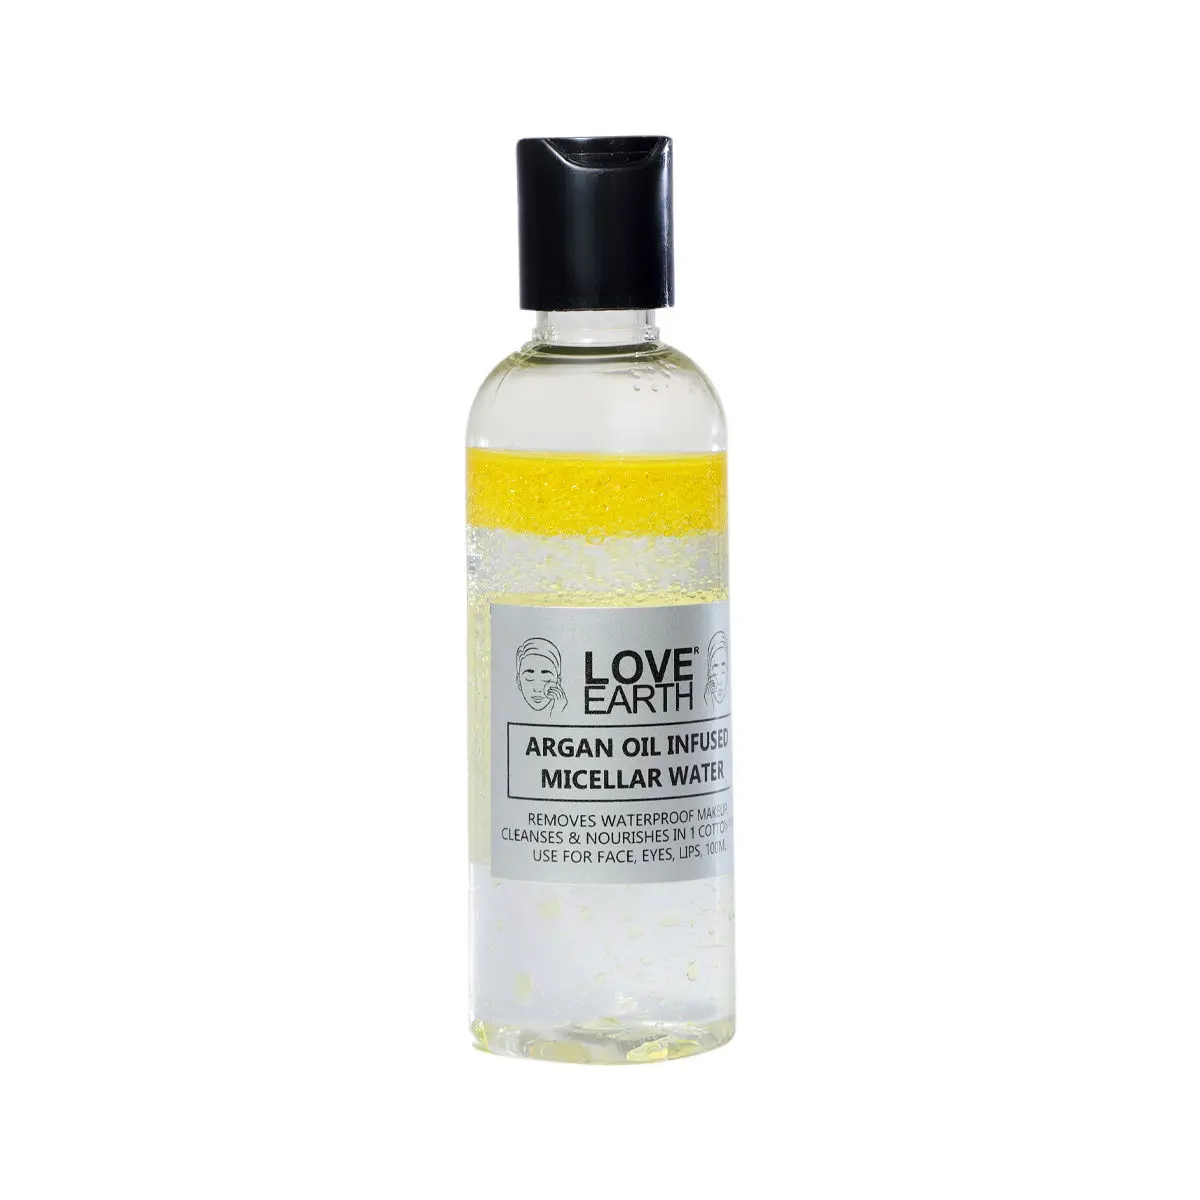 Love Earth Argan Oil-Infused Micellar Water Makeup & Pollutant Remover With Argan Oil & Micellar Water For All Skin Types 100ml